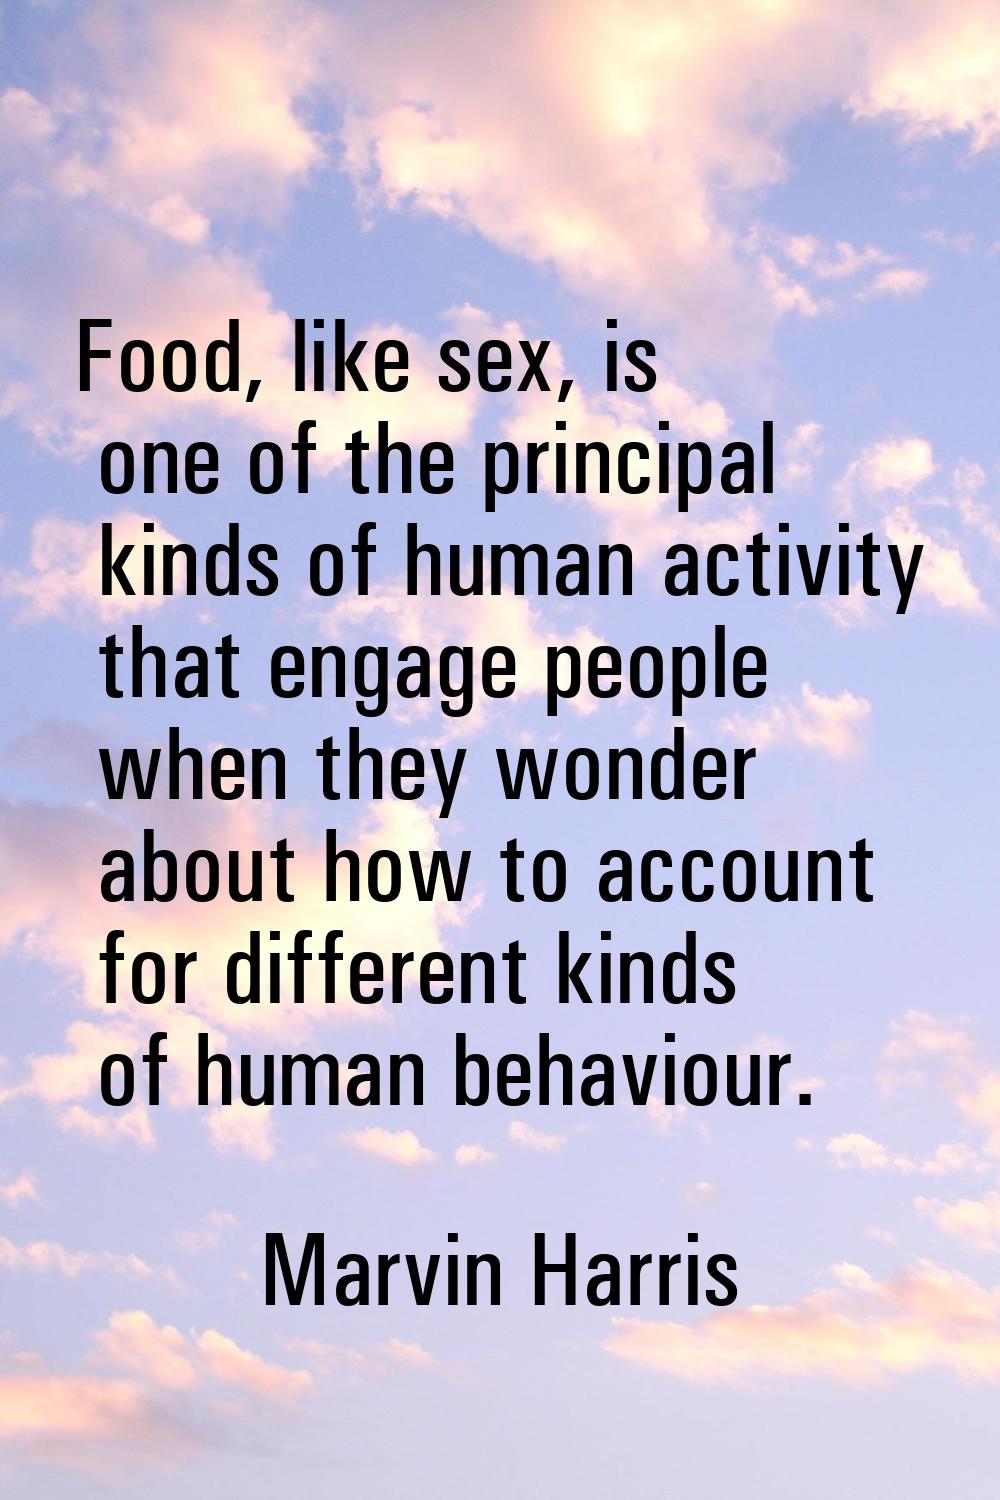 Food, like sex, is one of the principal kinds of human activity that engage people when they wonder